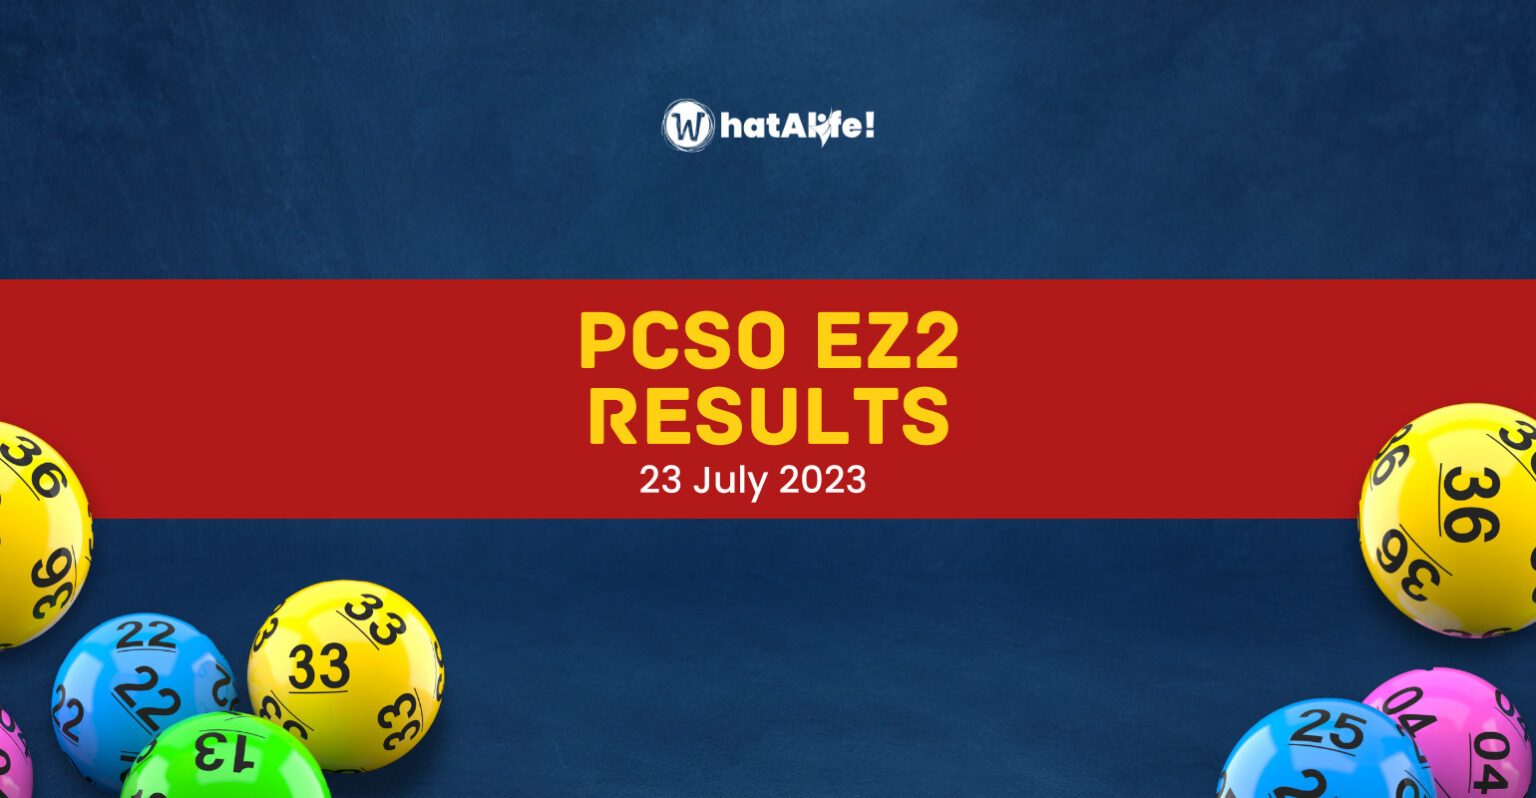 EZ2 2D RESULTS July 23, 2023 (Sunday) WhatALife!